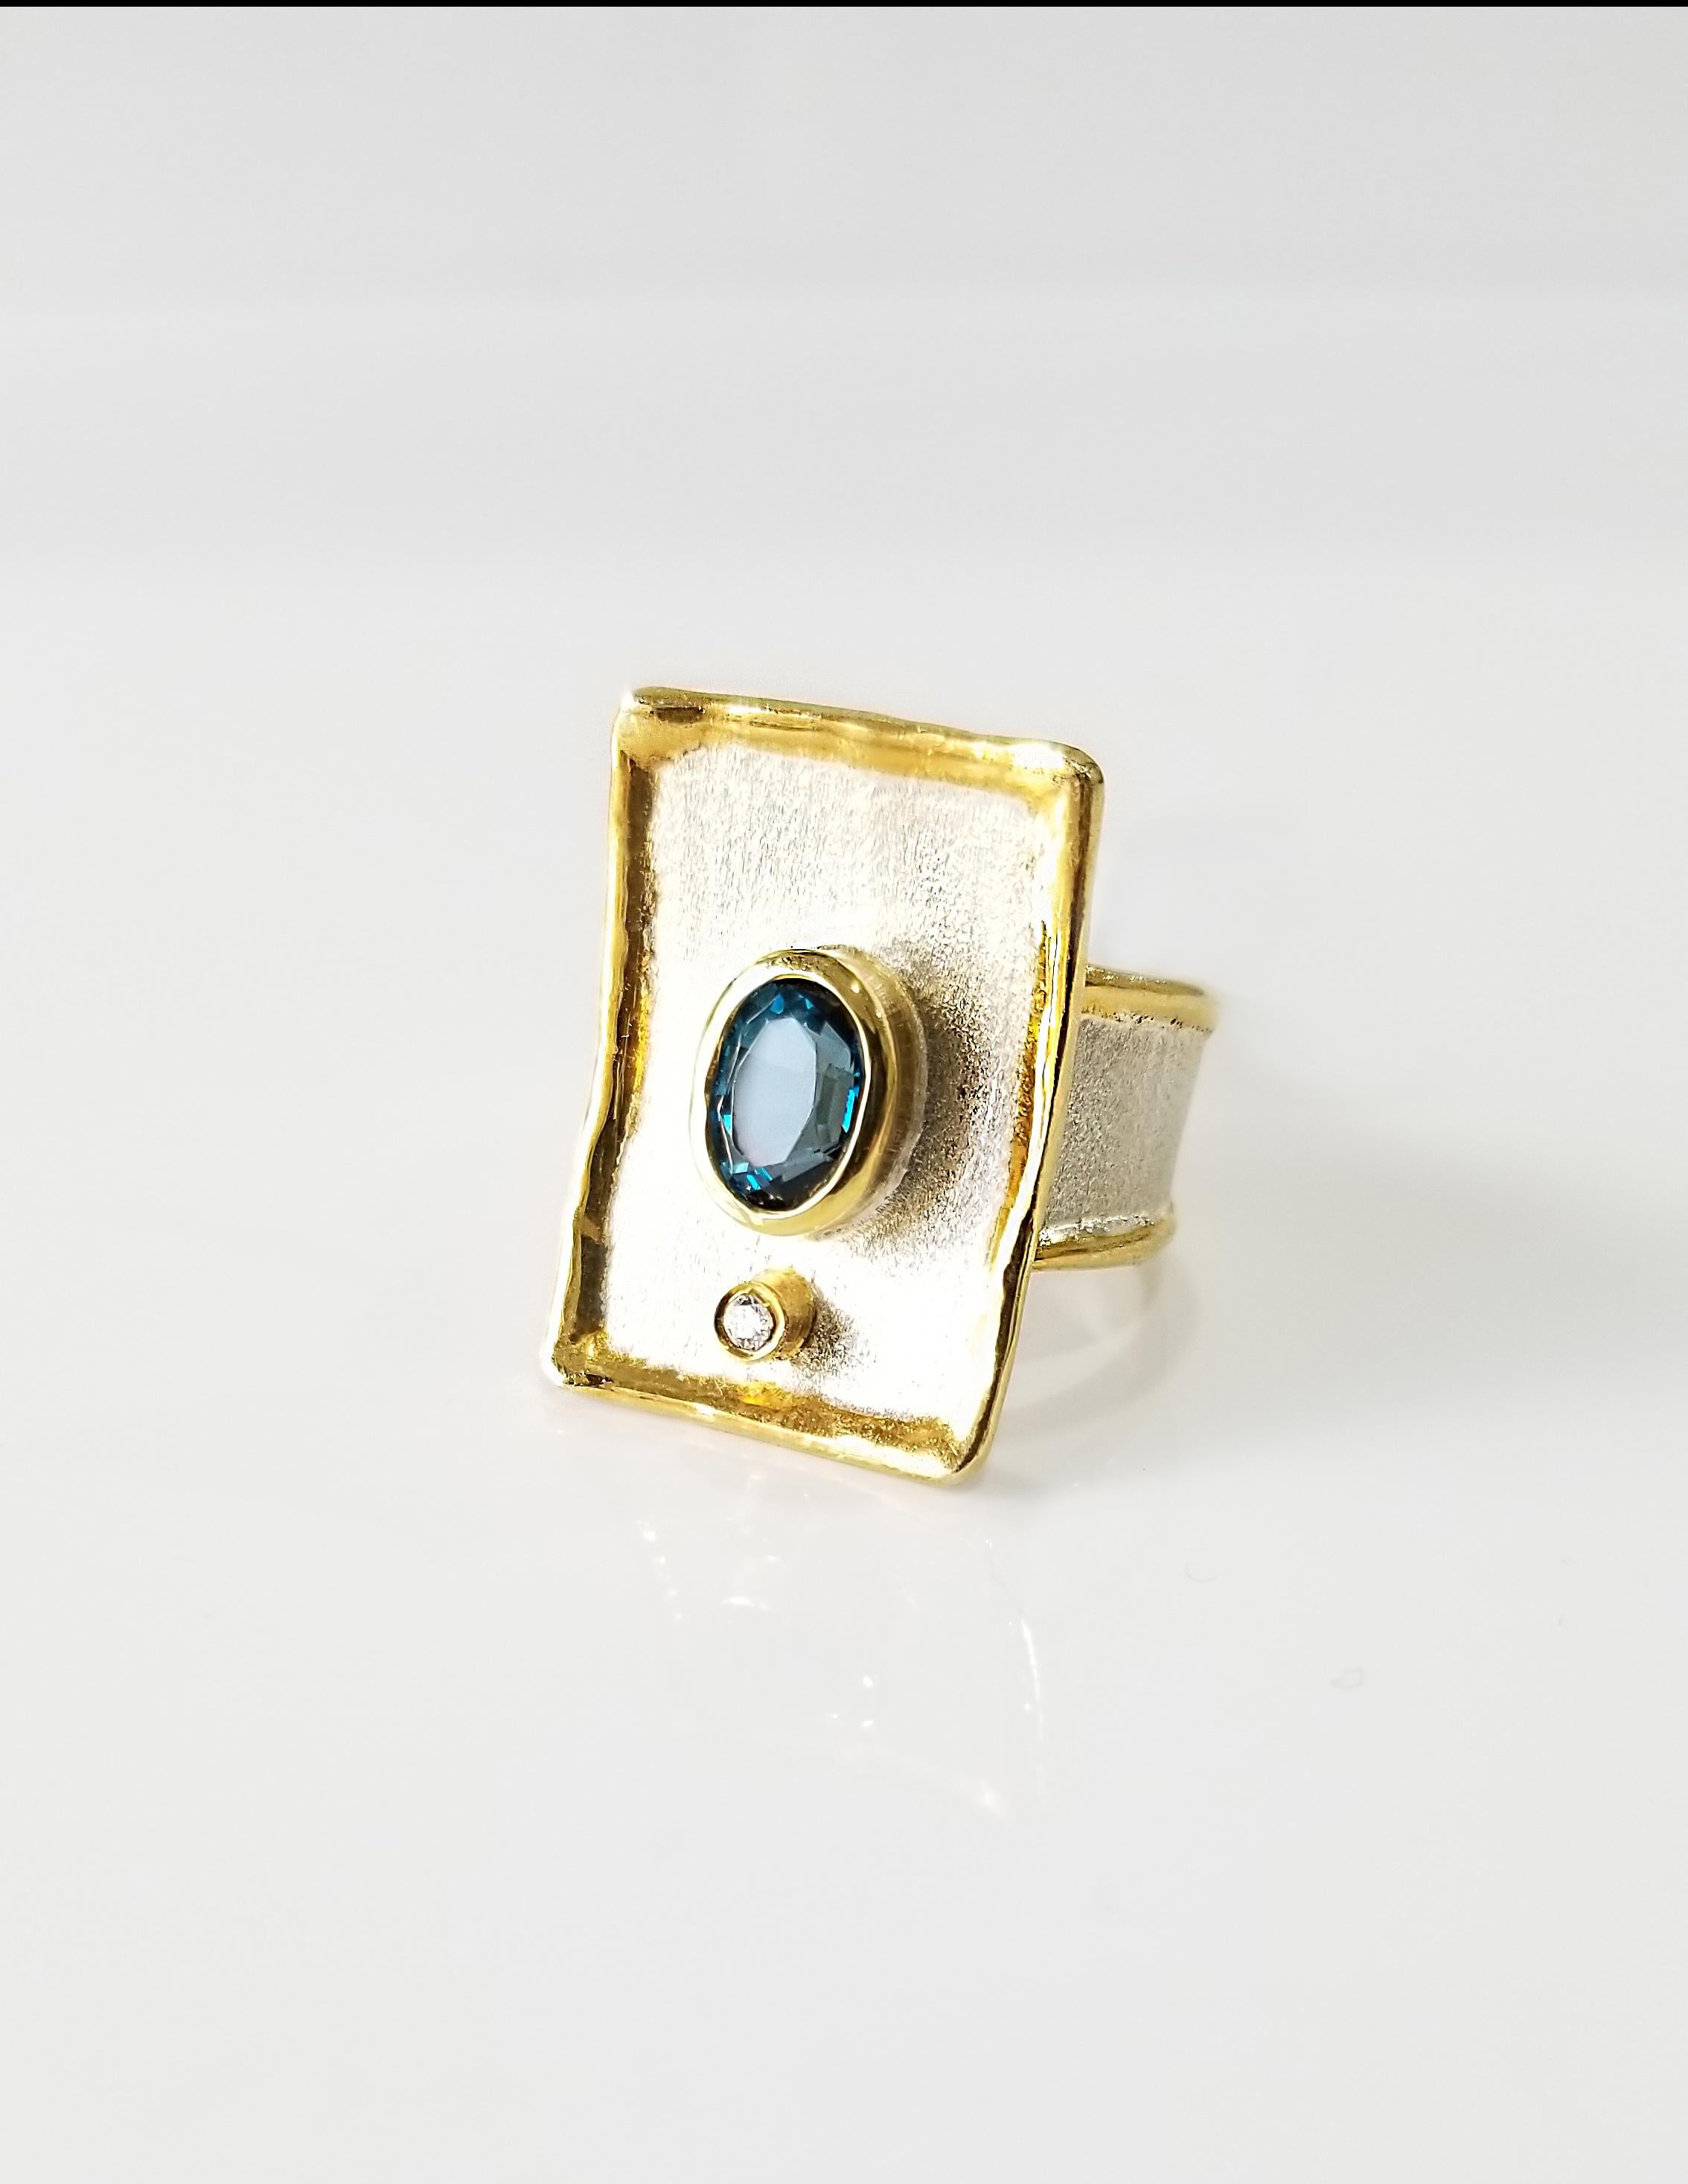 
Yianni Creations 100% Handmade Ring from Fine Silver with a layover of 24 Karat Yellow Gold features 1.60 Carat London Blue Topaz accompanied by 0.03 Carat Diamond all complimented by unique techniques of craftsmanship - brushed texture and